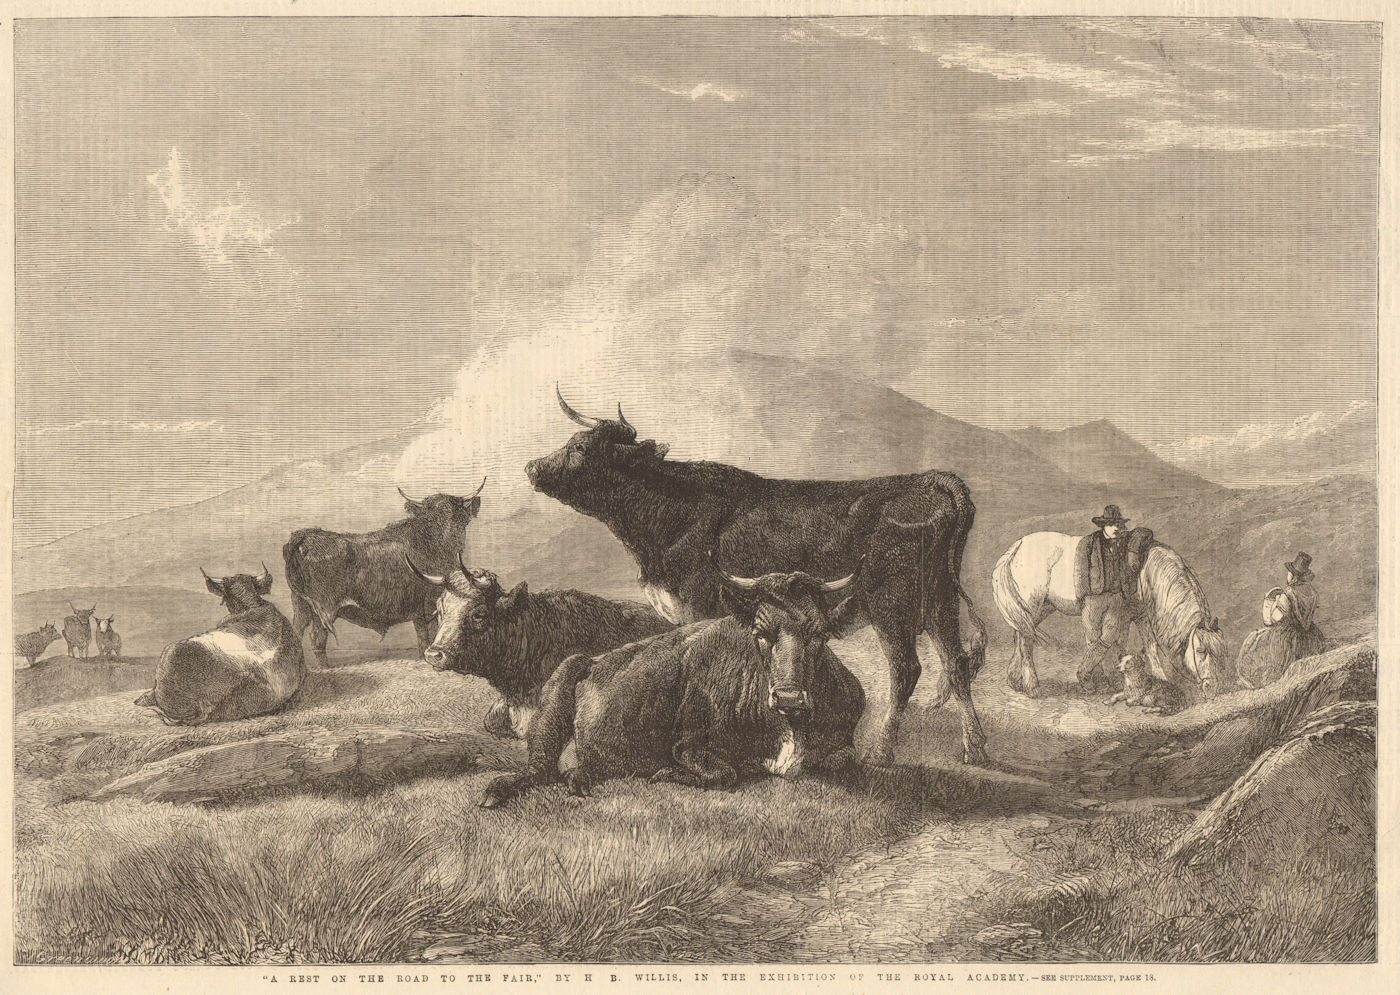 "A rest on the road to the fair "by H. B. Willis. Cattle. Fine arts 1861 print